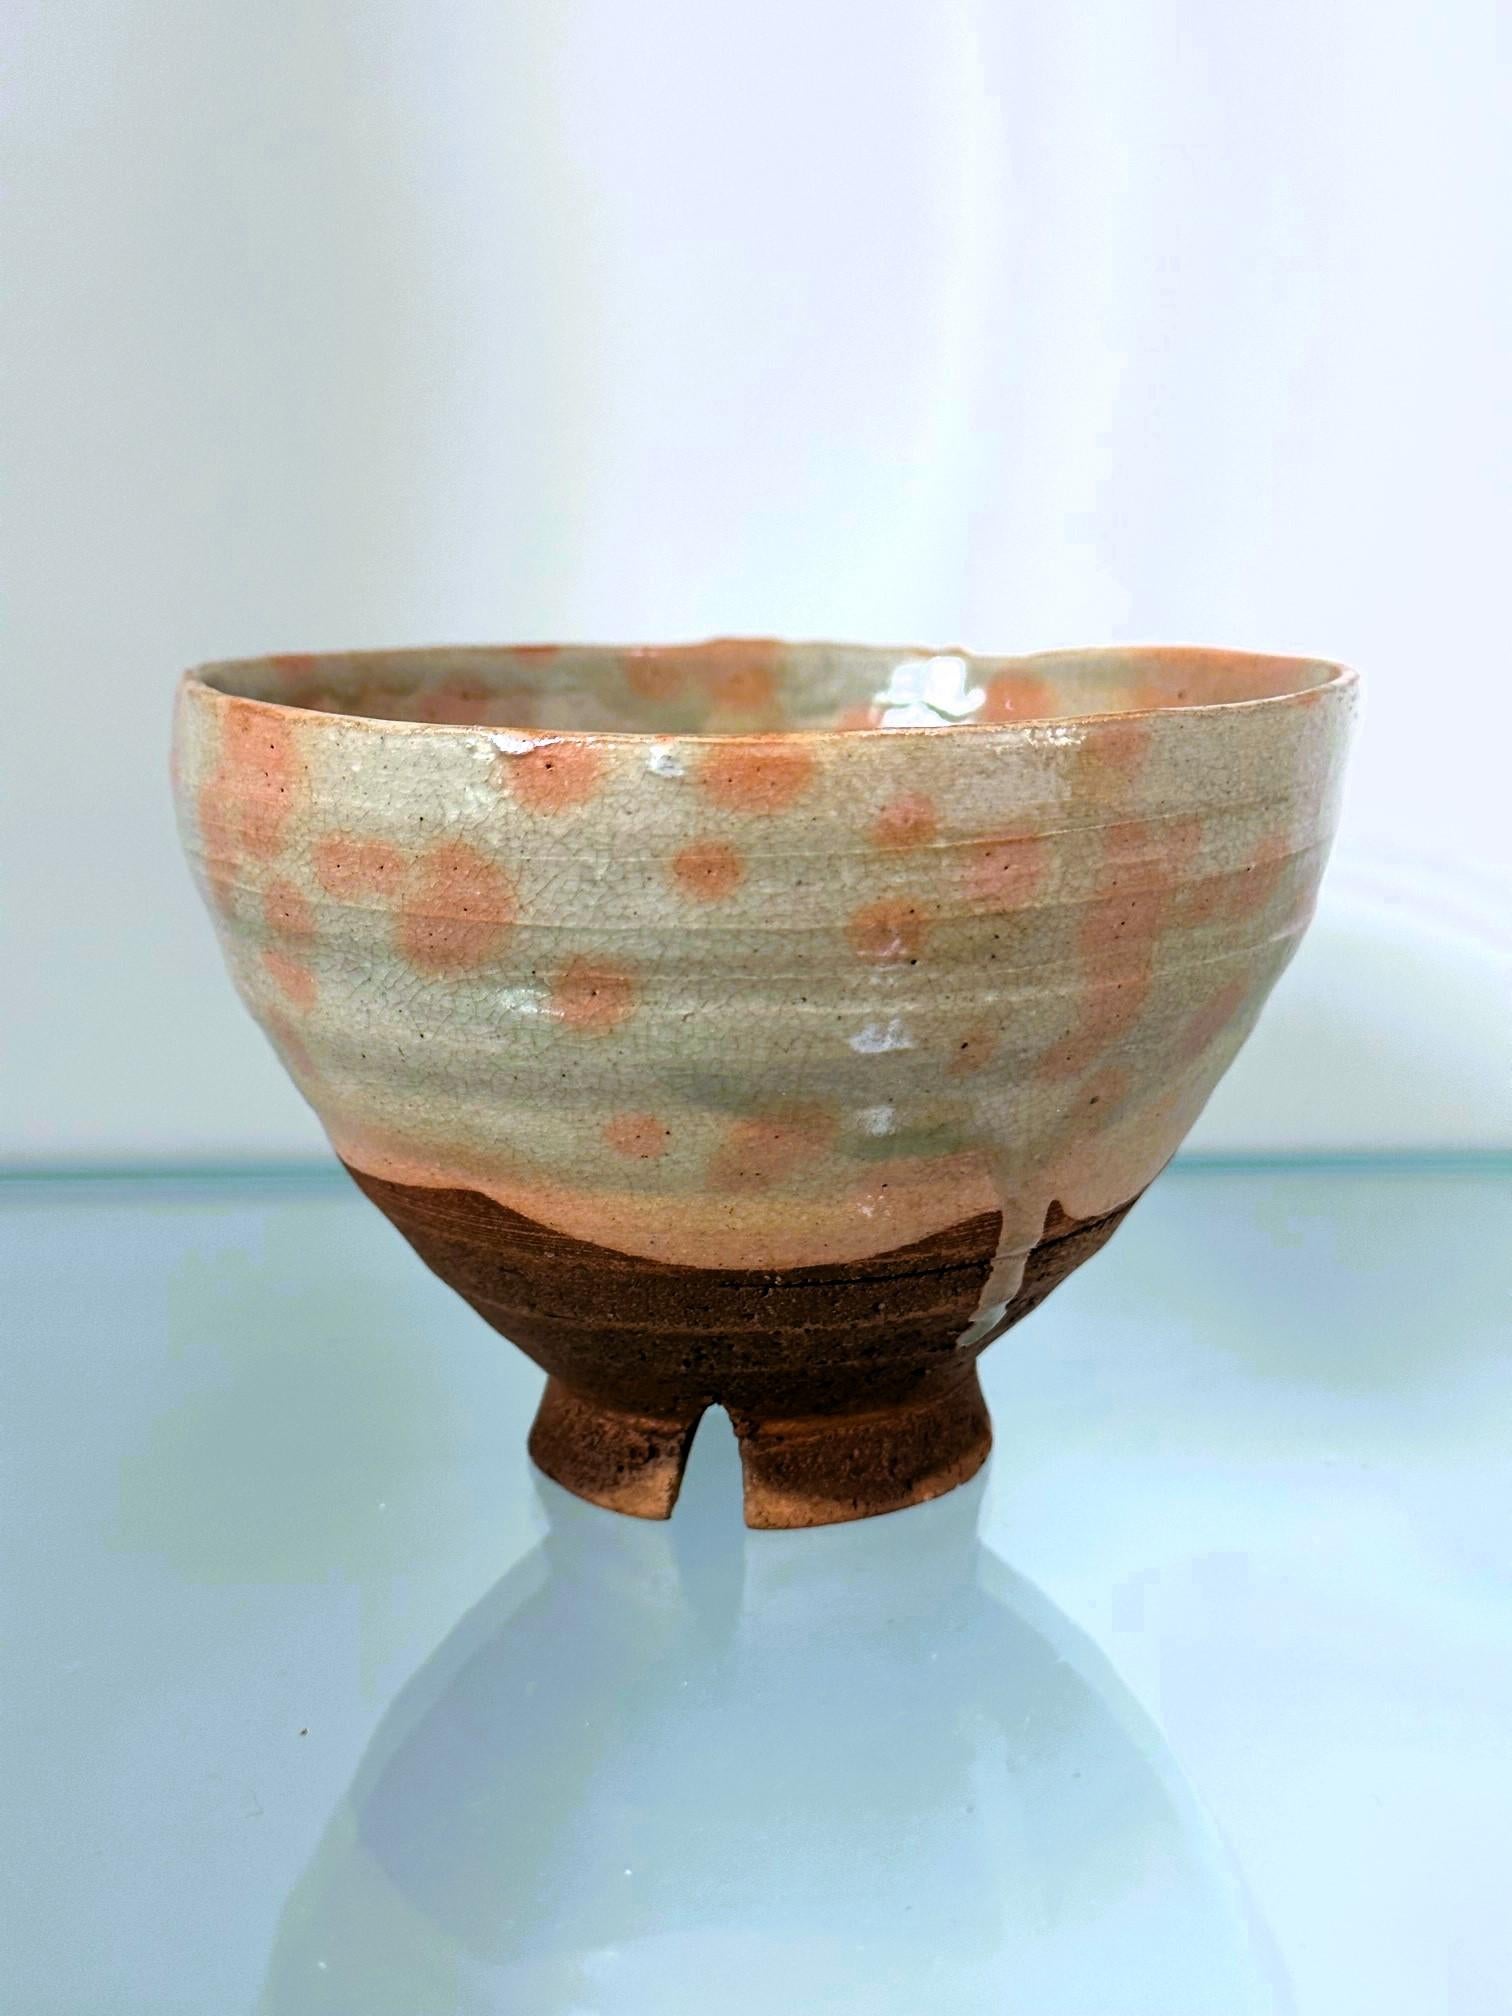 A bespoken Japanese ceramic tea bowl with glazed with fabric insert, pouch and original padded wood tomobako box. The chawan has a slightly irregular wall supported by a high notched foot ring. The glaze features a distinct pinkish spotty pattern on